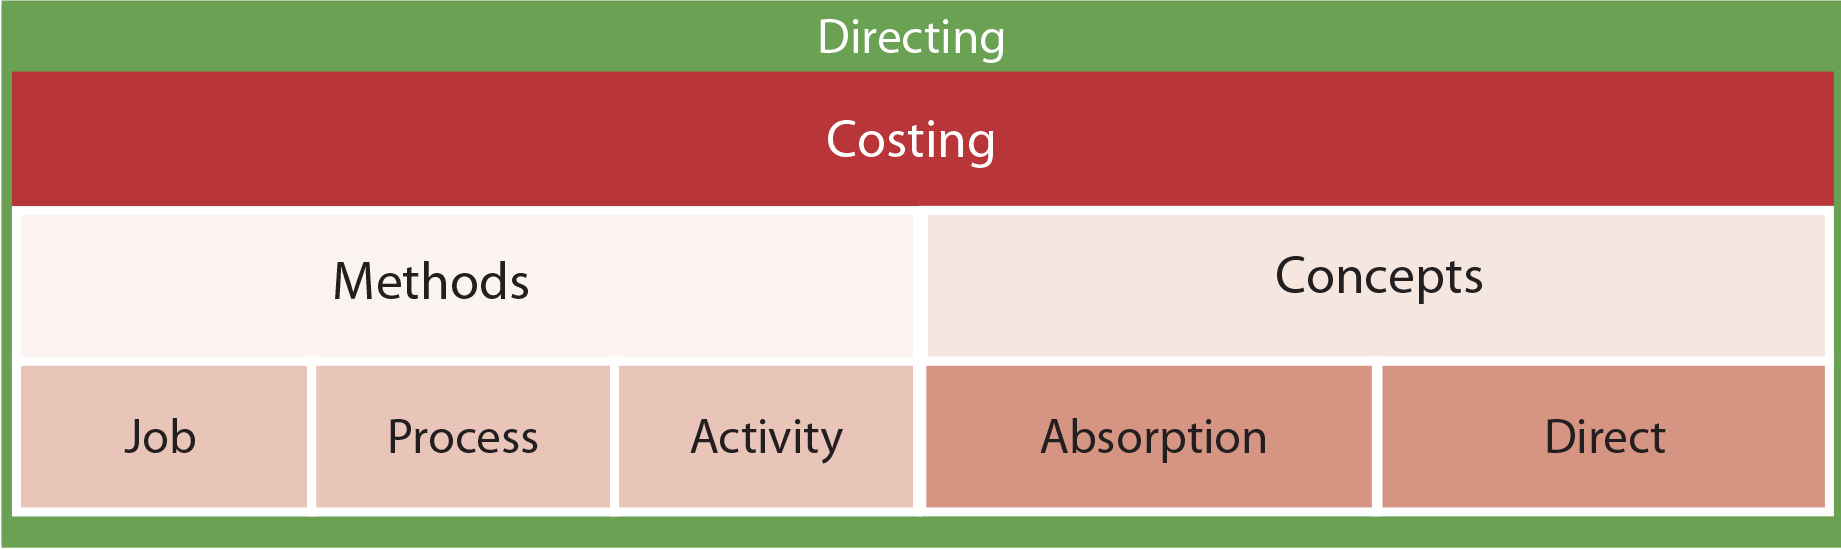 Managerial Accounting Functions - Costing chart